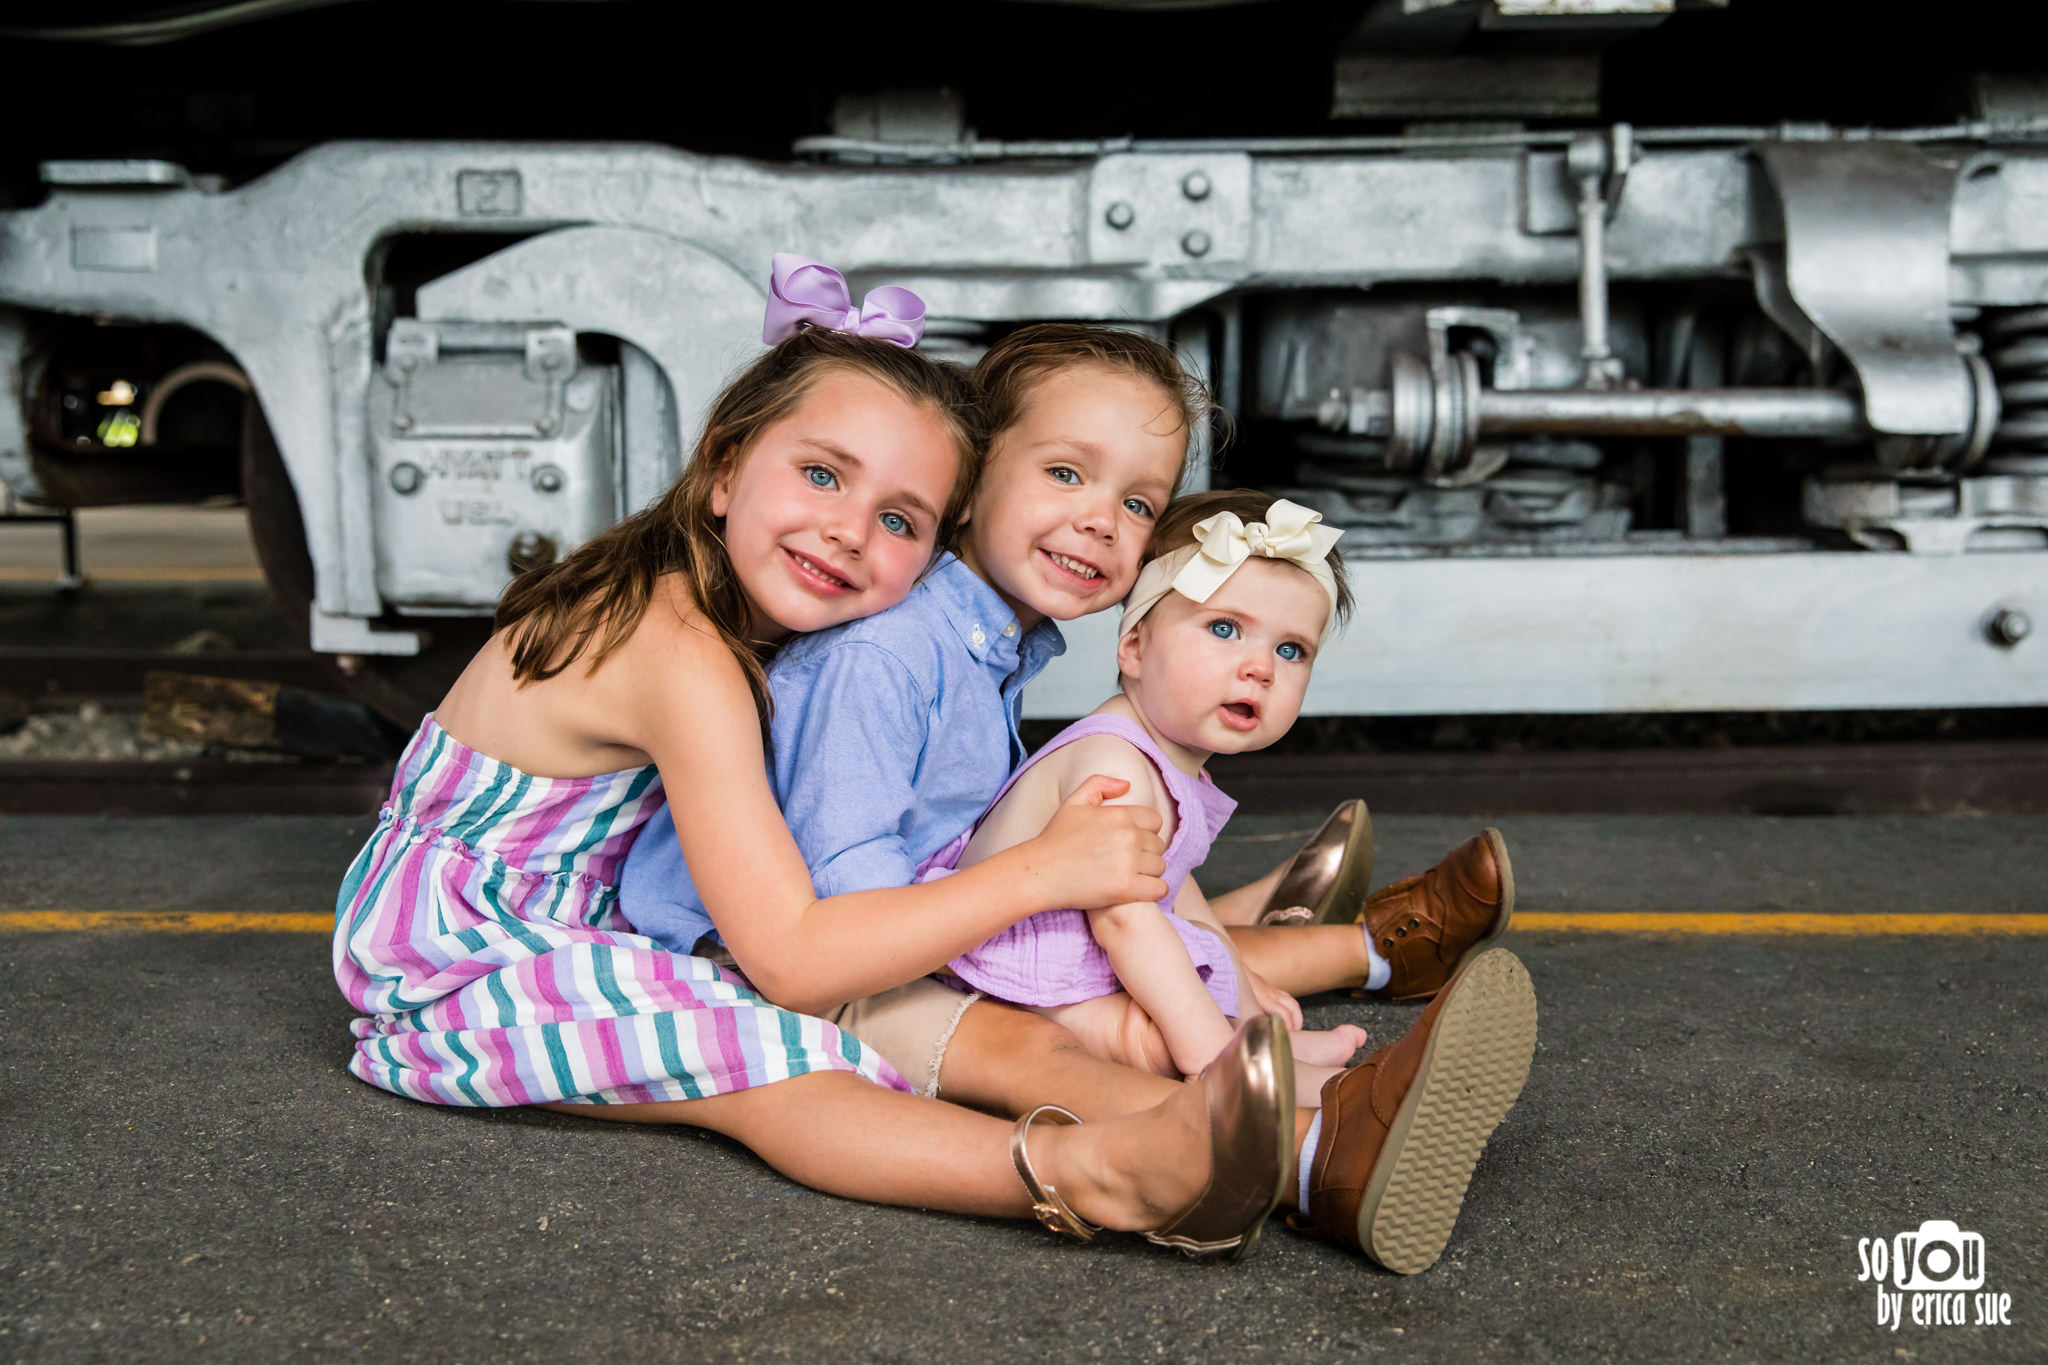 so-you-by-erica-sue-gold-coast-railroad-museum-miami-family-photo-shoot-session-6831.JPG